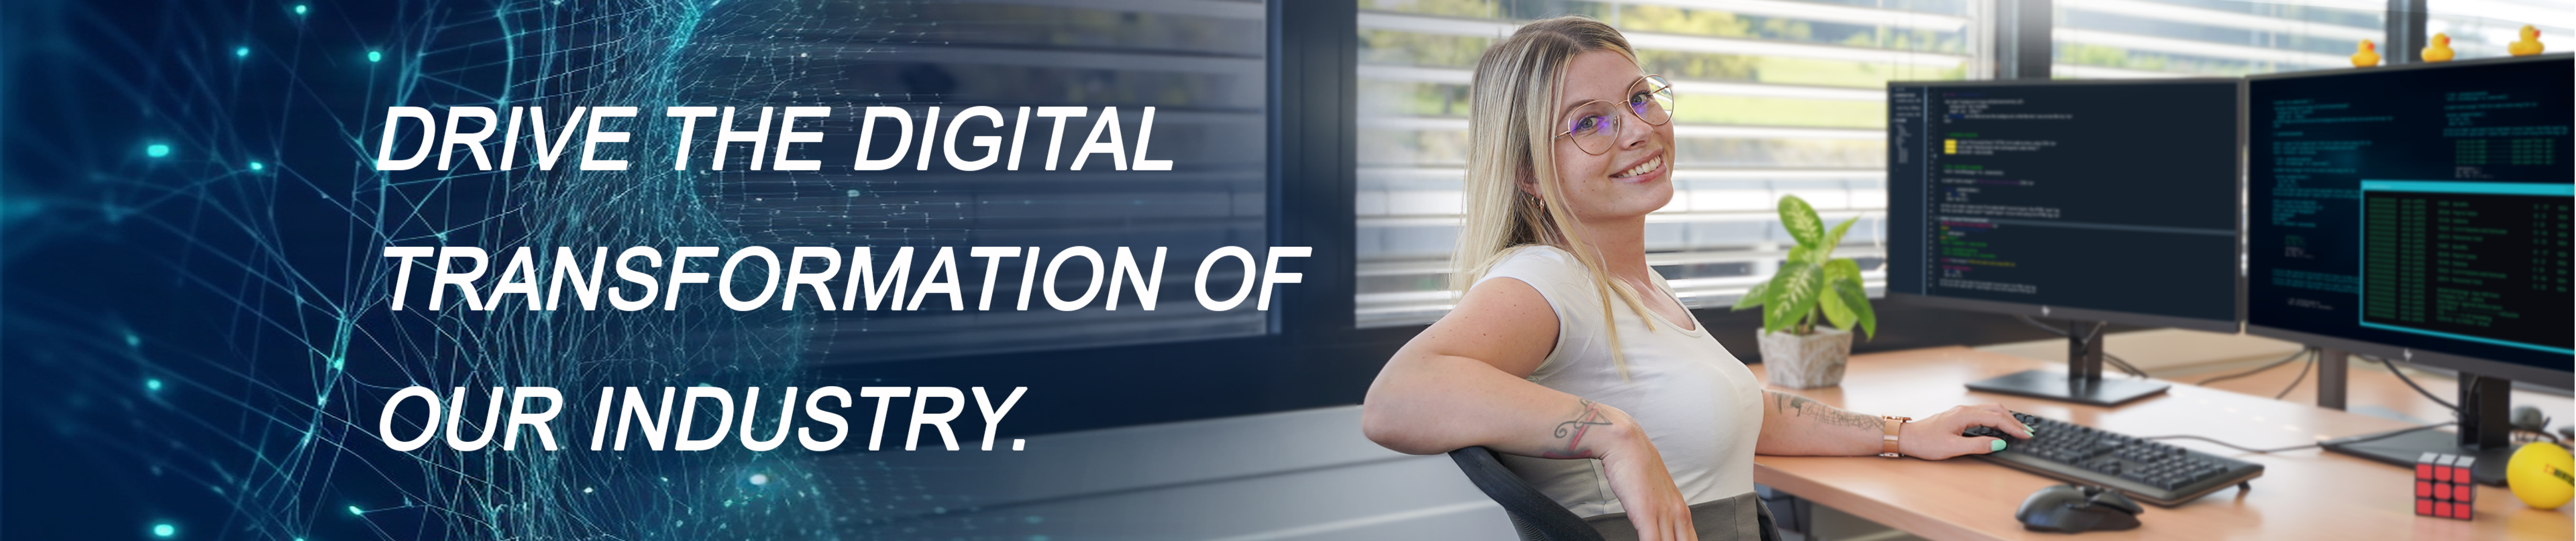 IT employee on her desk with the text "drive the digital transformation of our industry"